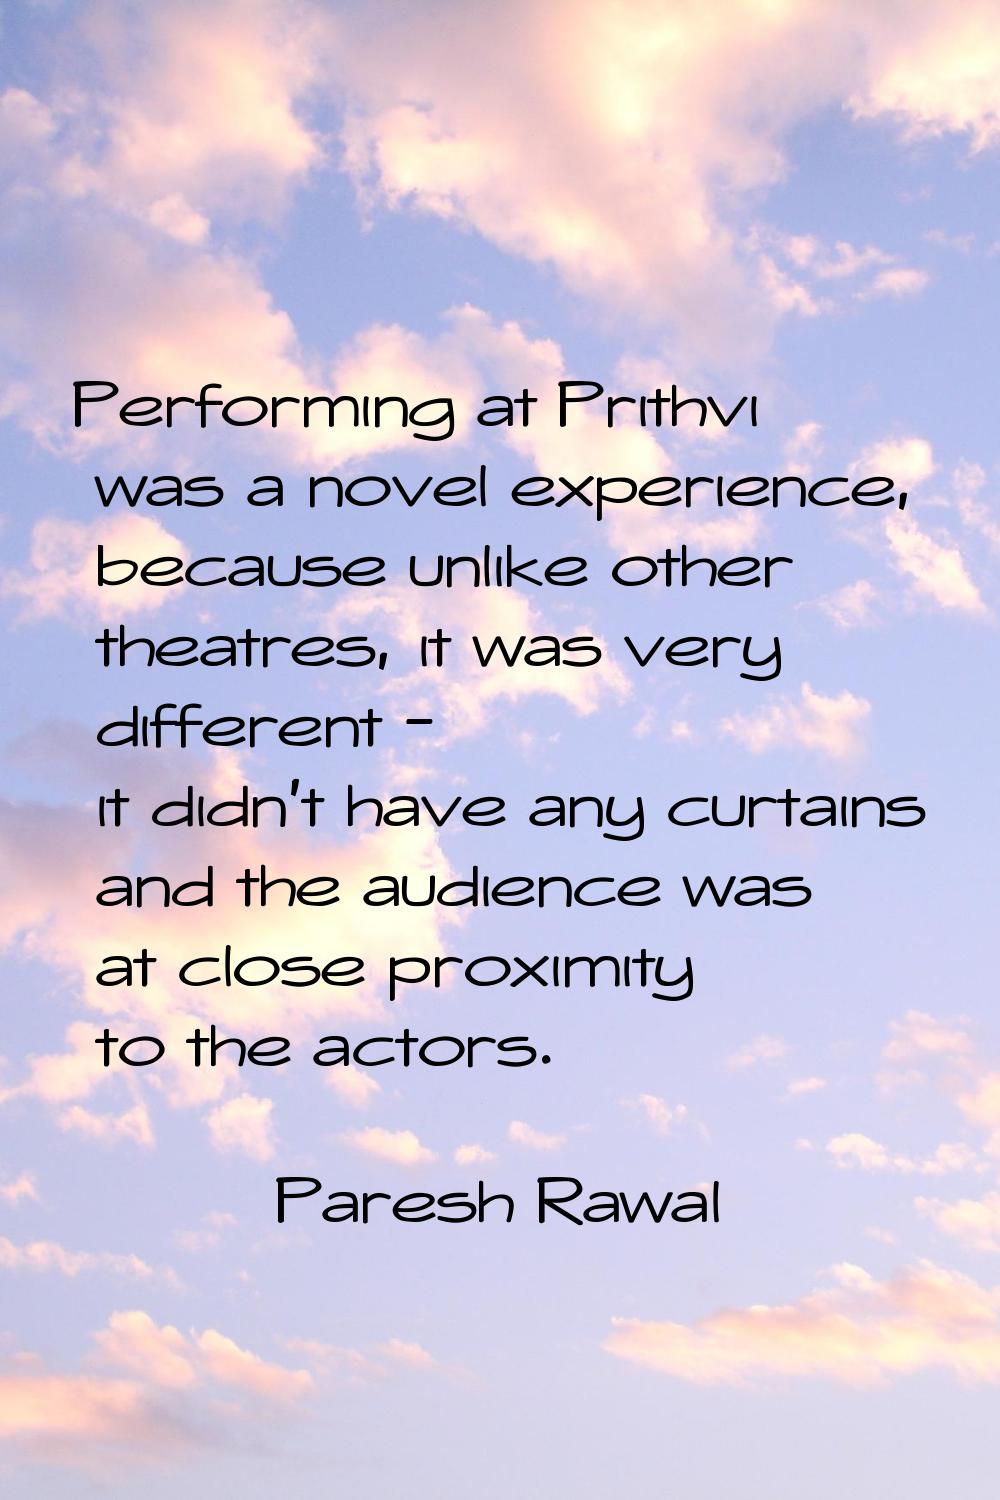 Performing at Prithvi was a novel experience, because unlike other theatres, it was very different 